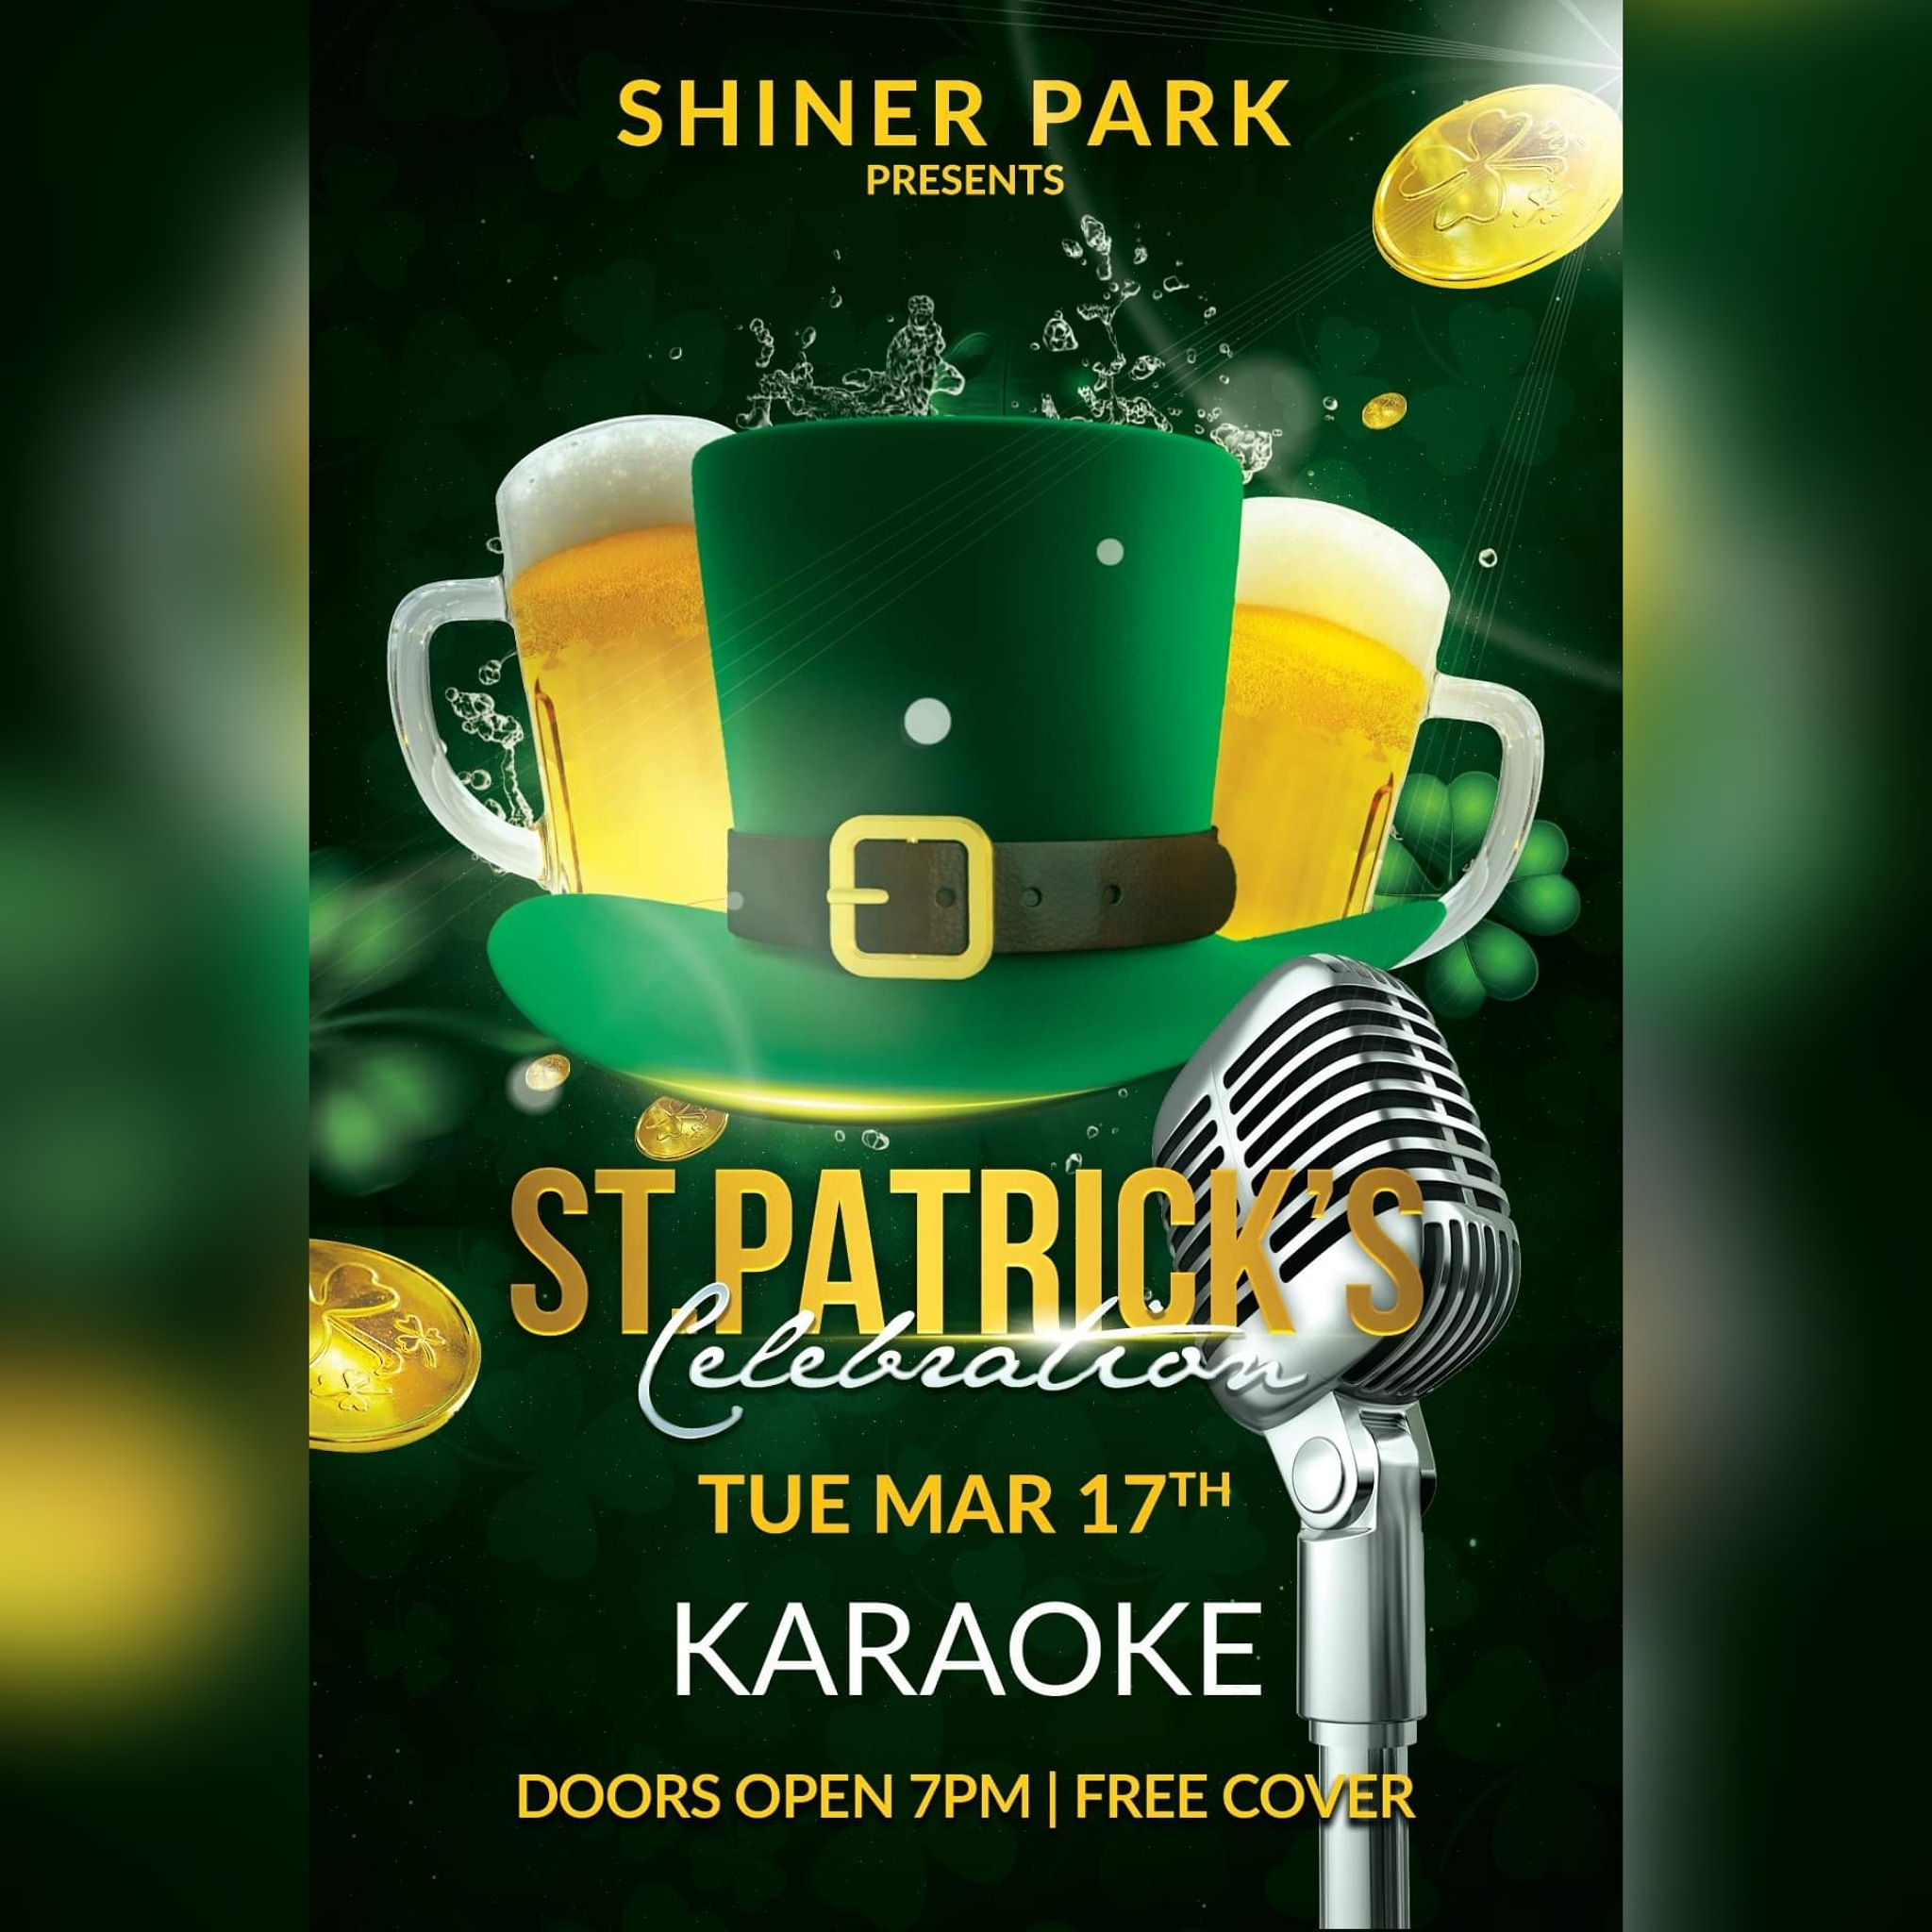 Shiner Park St Patty S Day Bash Next Tuesday Free Cover For Everyone Doors Open At 7pm T Co Ia04qw9a3o Twitter